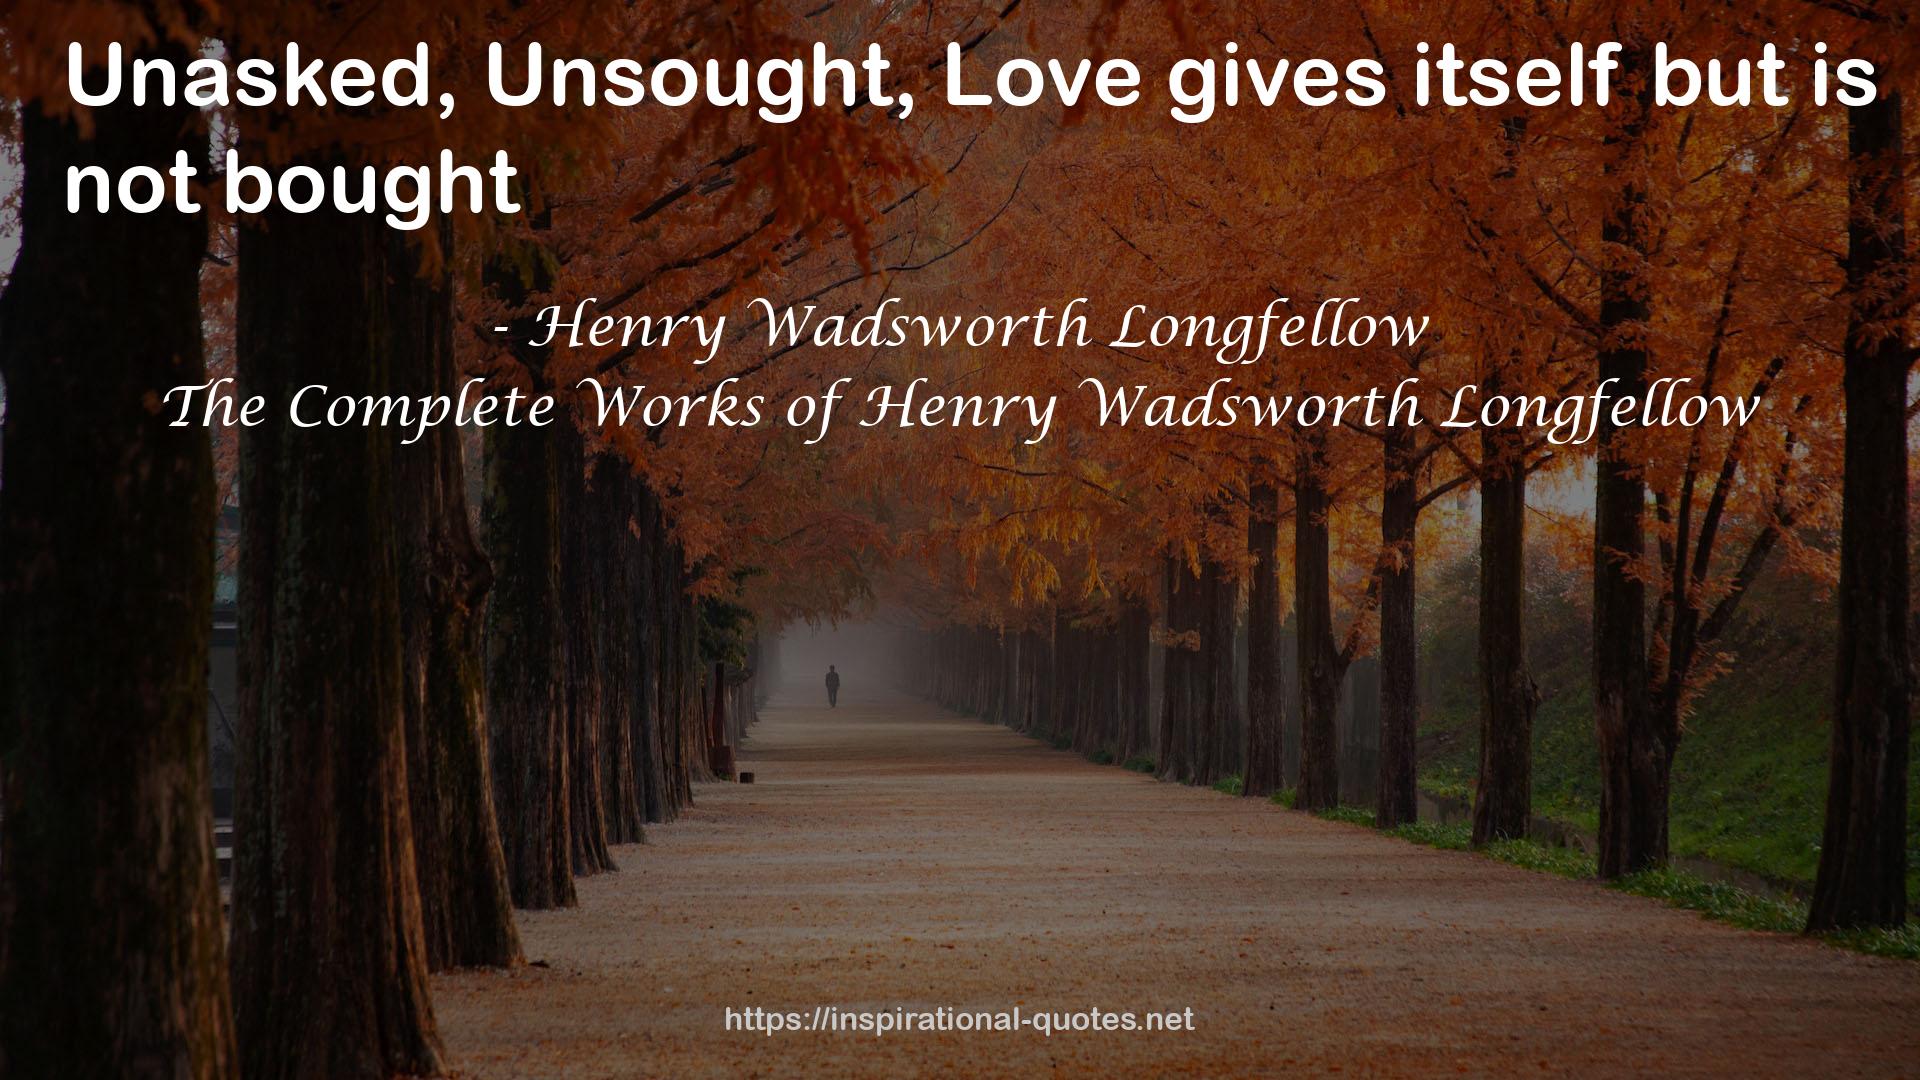 The Complete Works of Henry Wadsworth Longfellow QUOTES